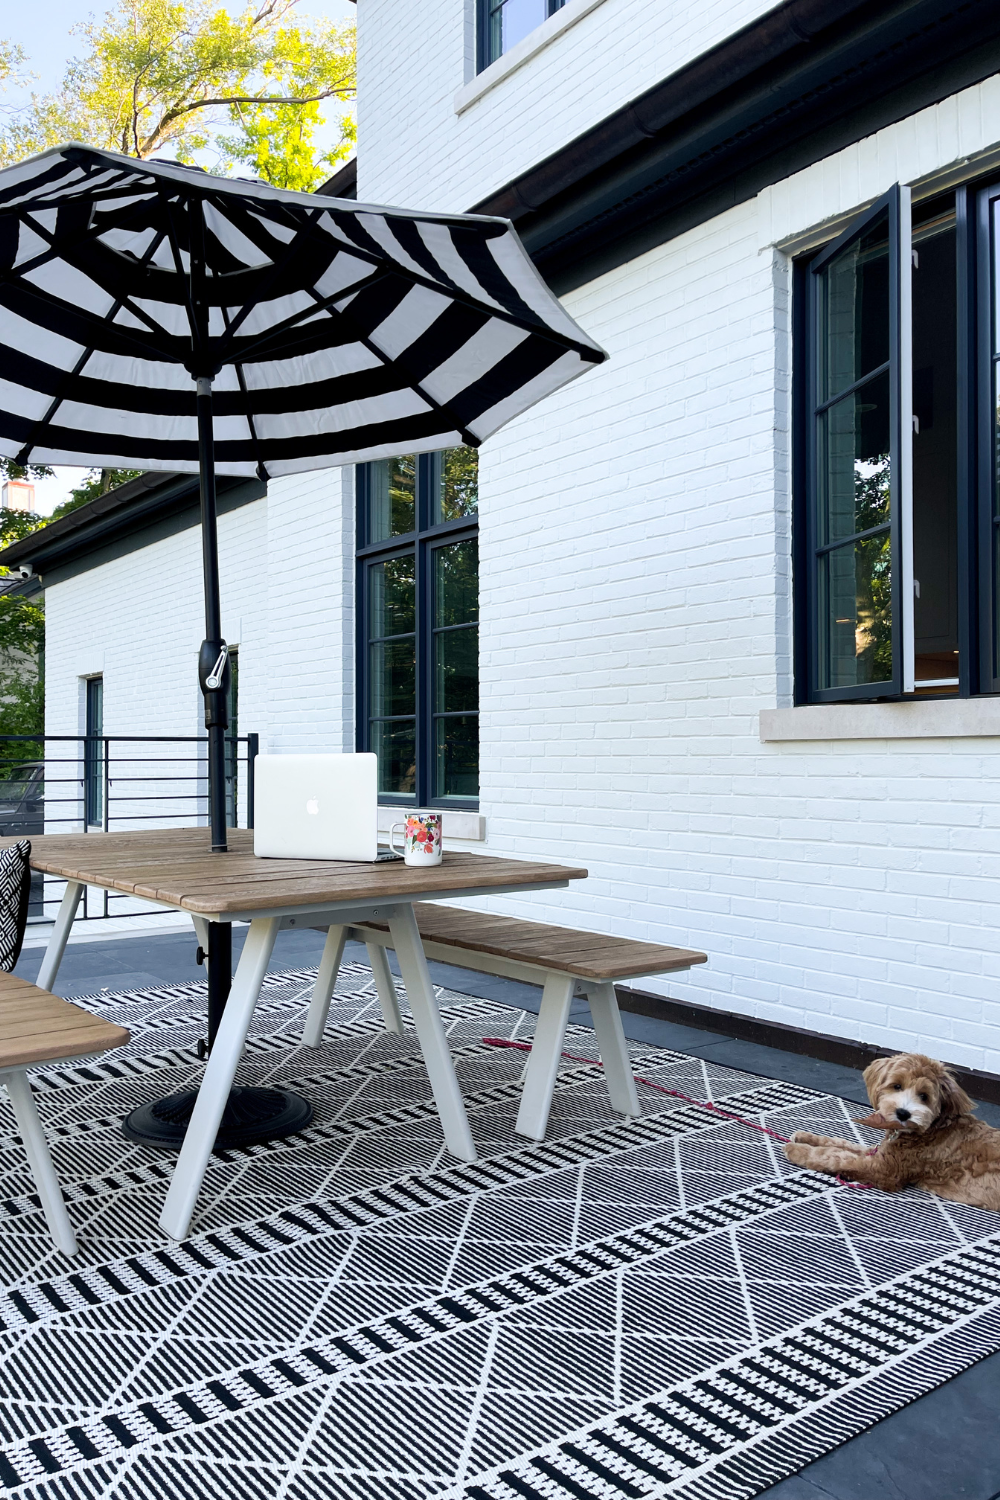 Balcony styling: picnic table, black and white rug, umbrella. Pictured is Suzanne's dog, Georgia